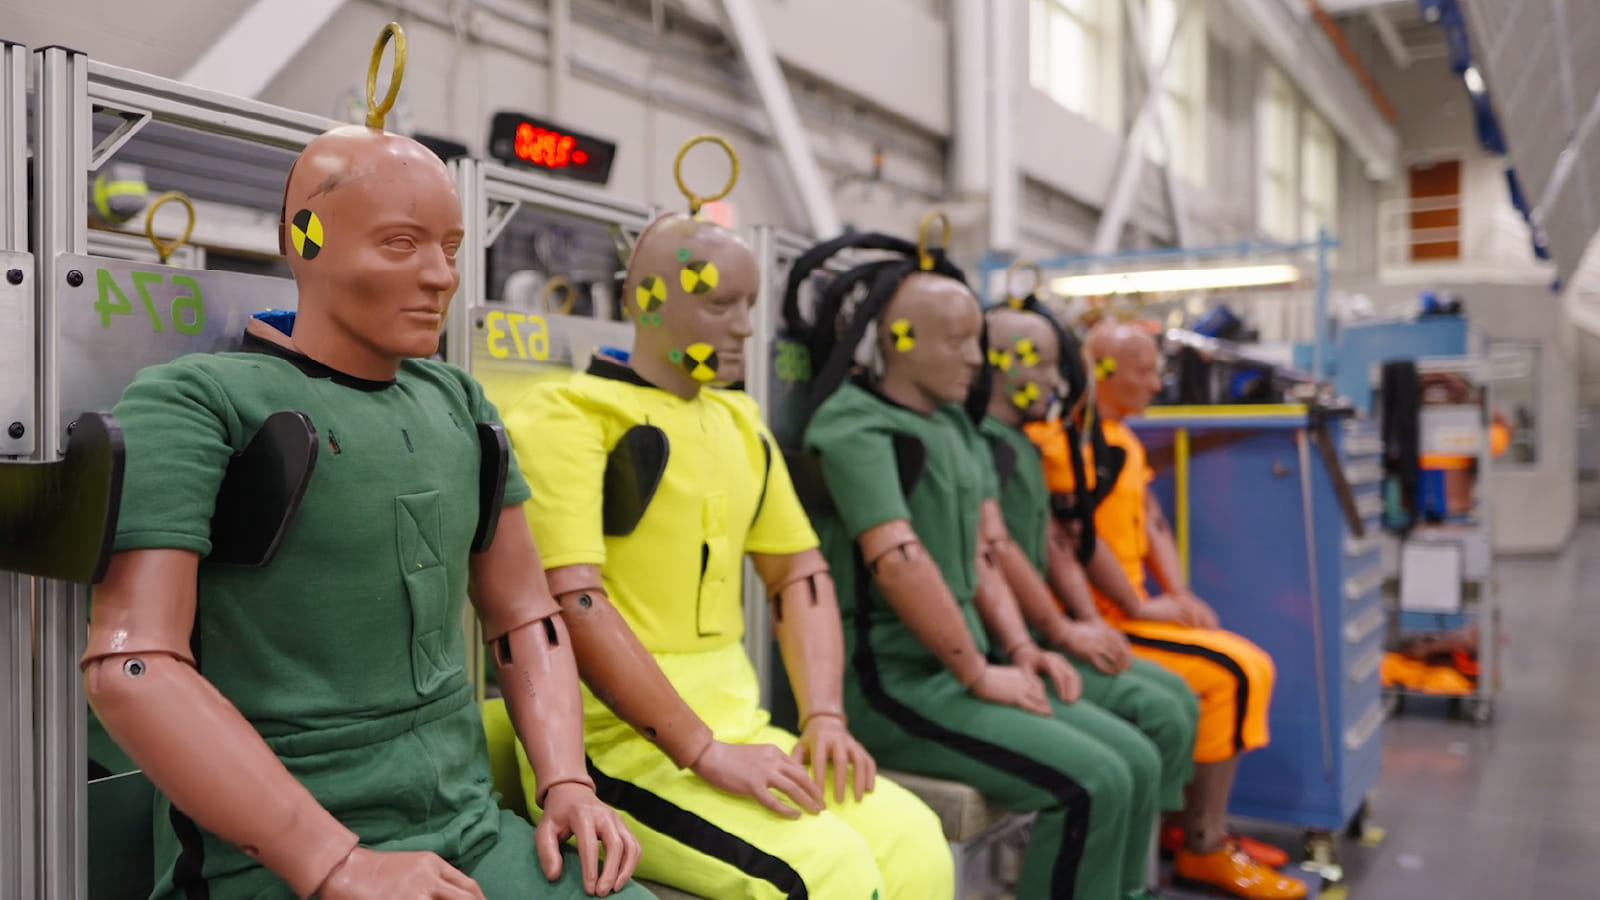 Five safety test dummies strapped into seats